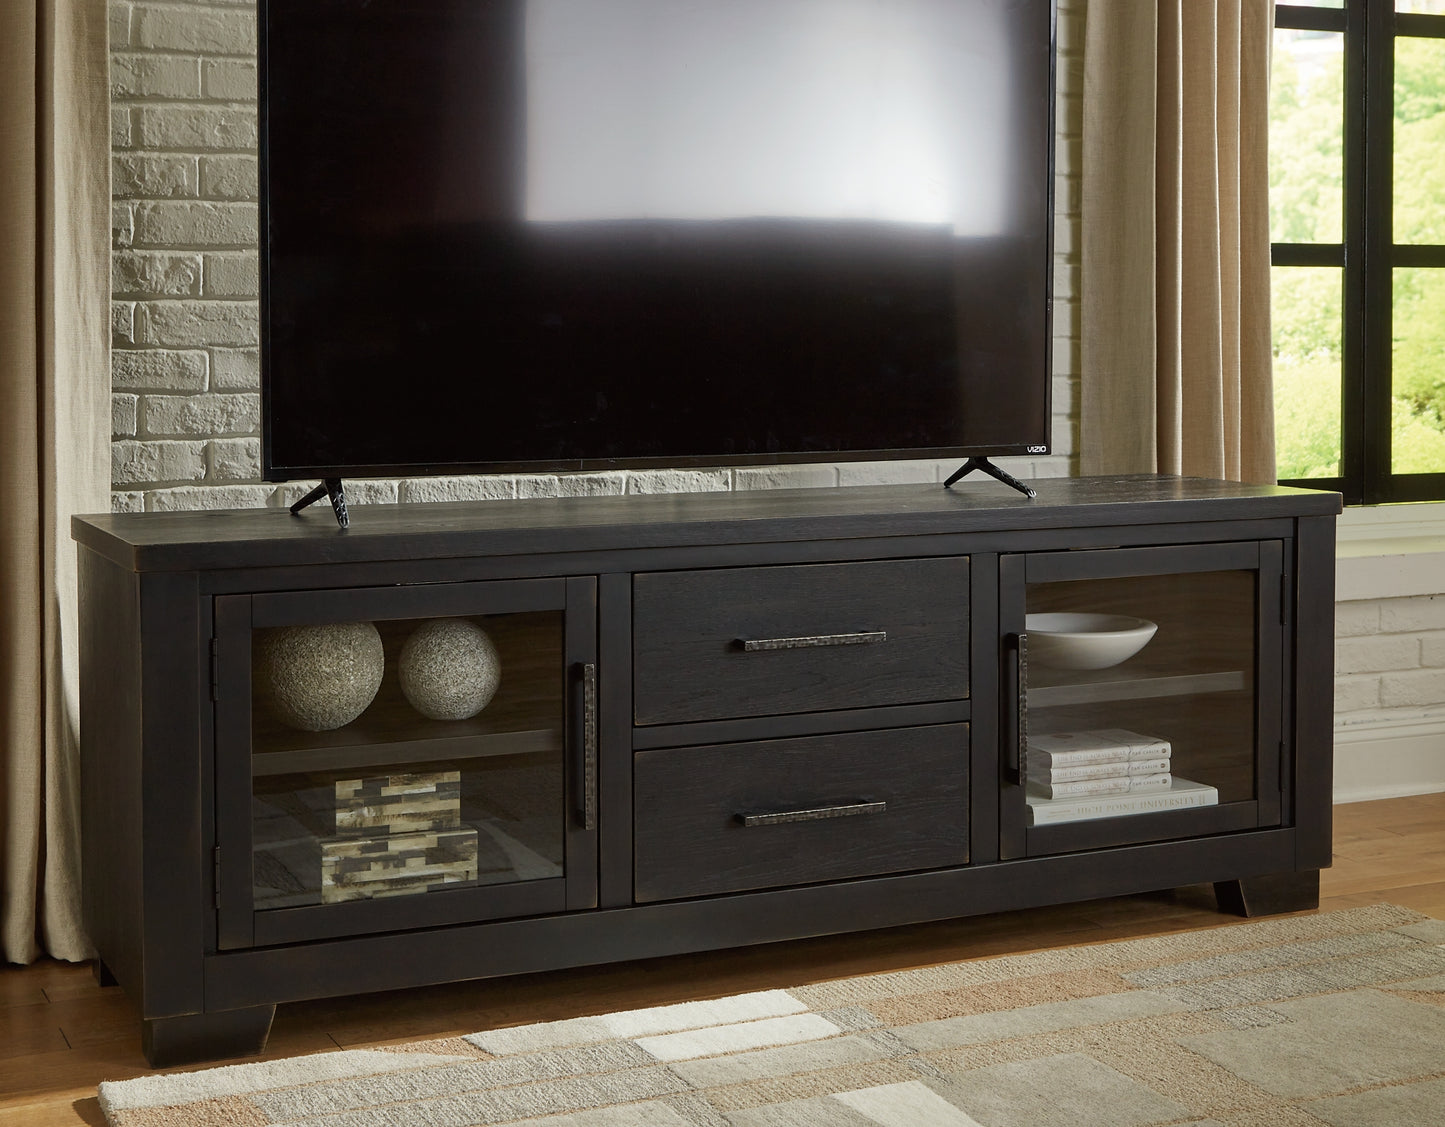 Galliden Extra Large TV Stand JB's Furniture  Home Furniture, Home Decor, Furniture Store